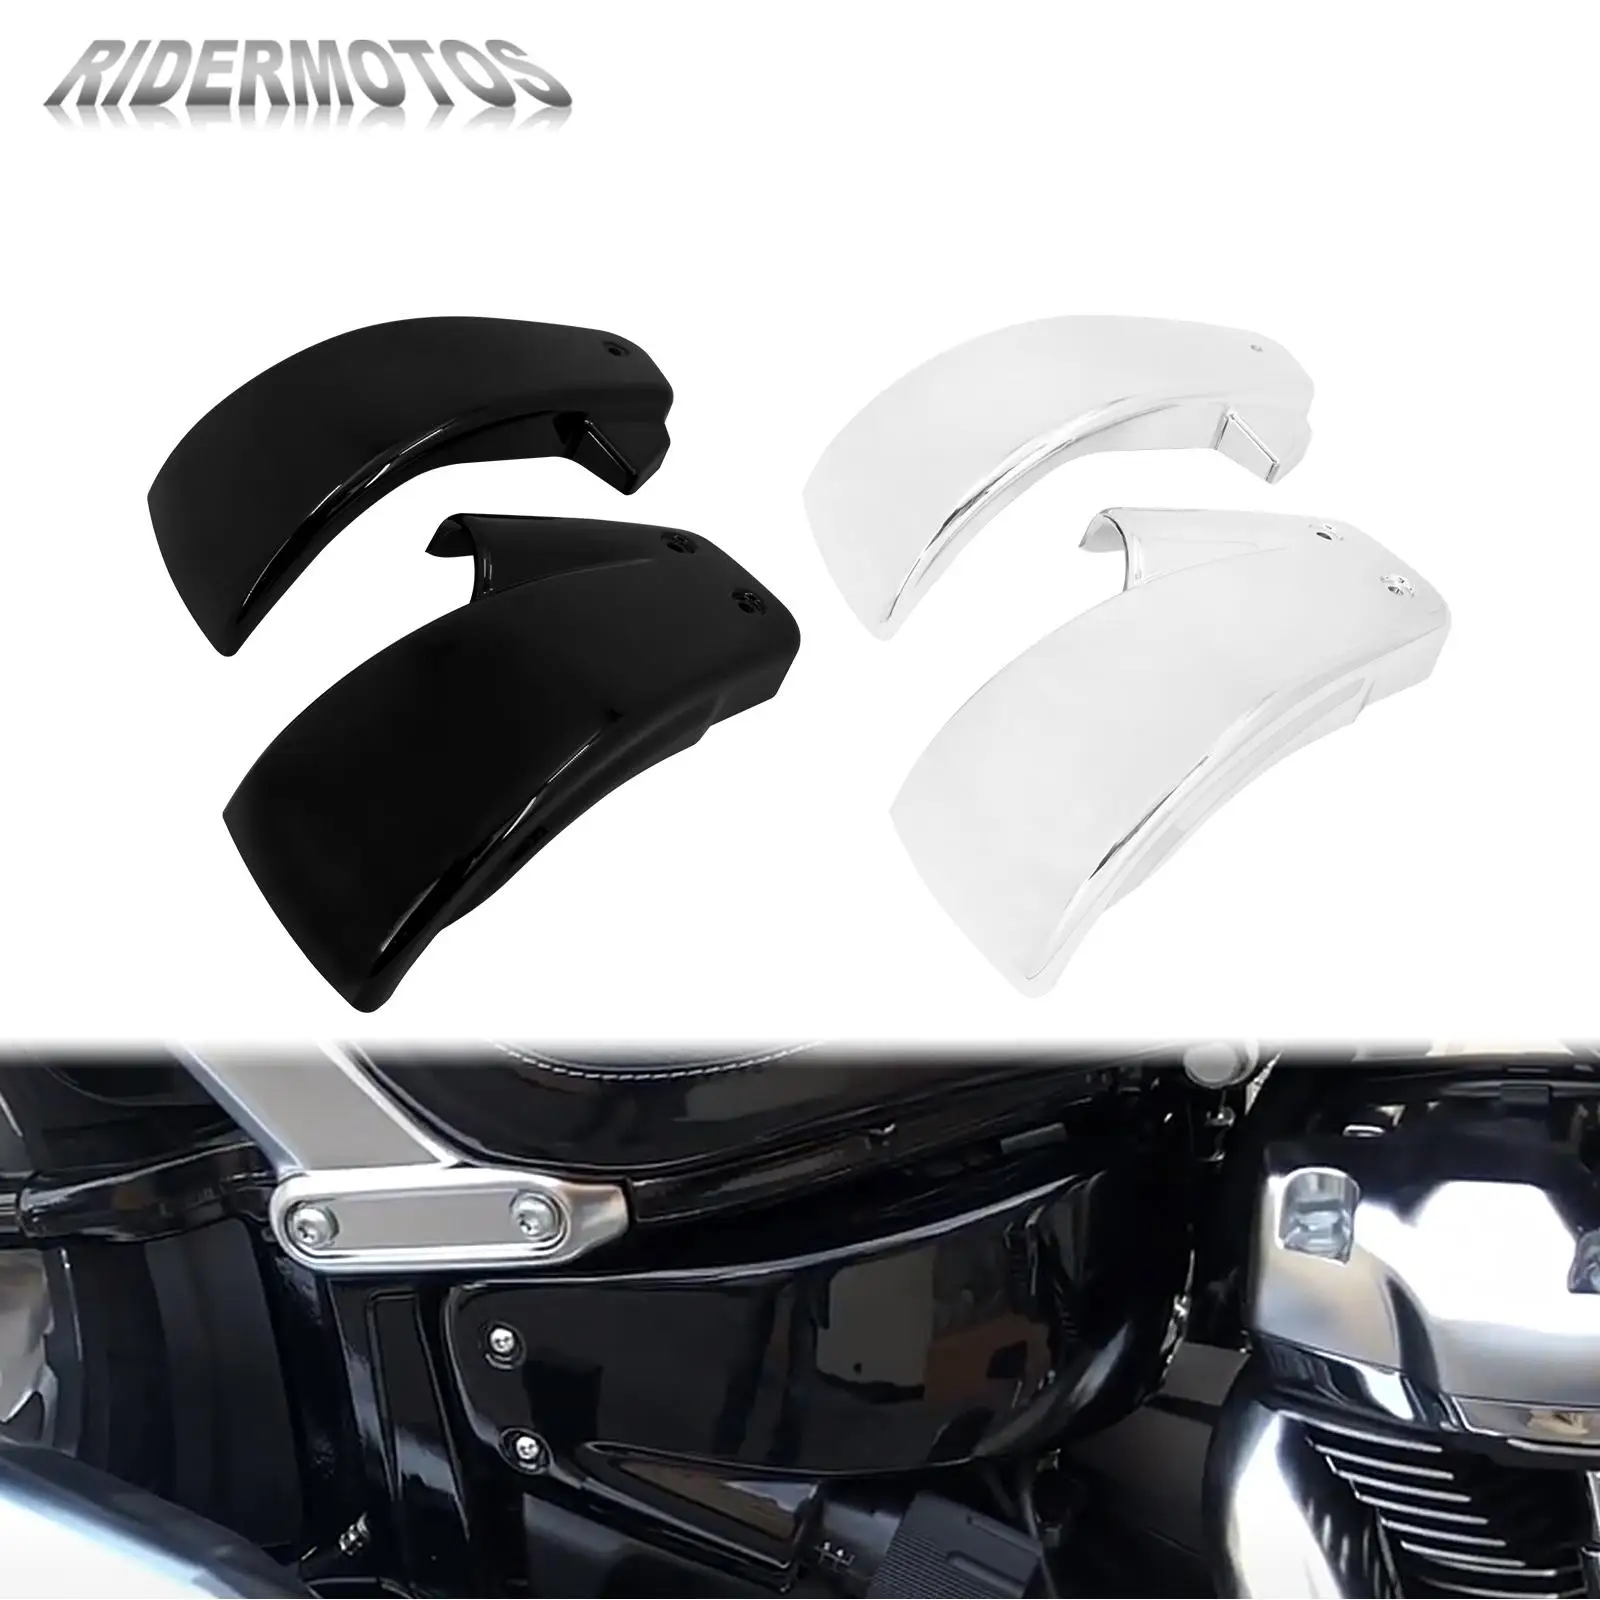 

Motorcycle Black/Chrome Battery Side Cover Fairing For Harley M8 Softail Breakout Fat Boy Bob Street Bob 2018-2021 2022 FXDR